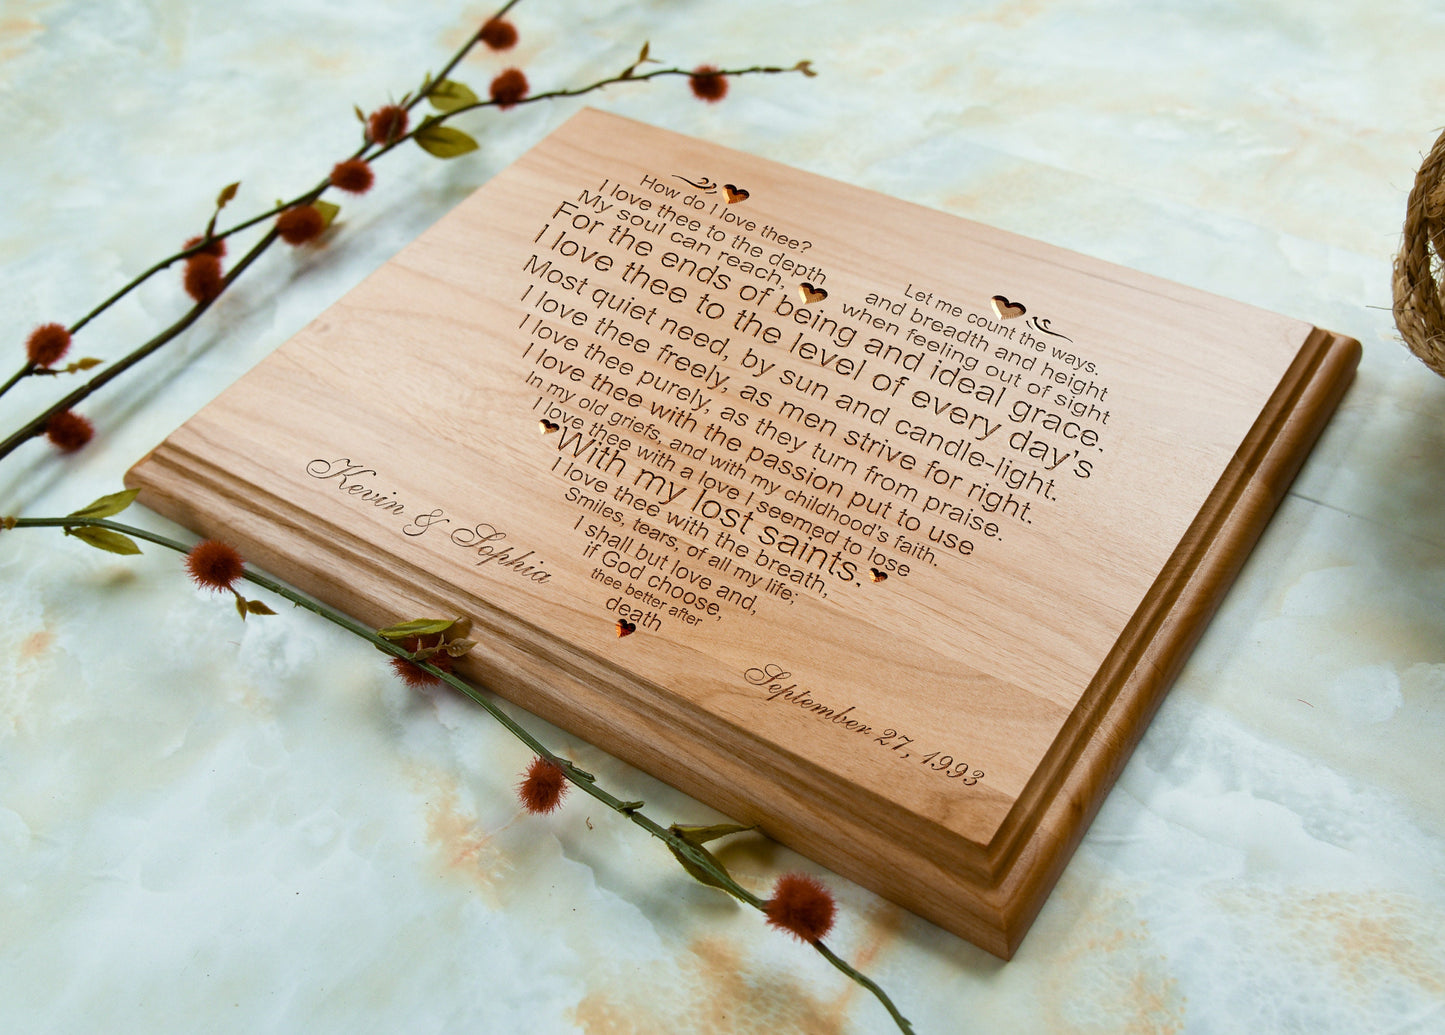 Personalized Plaque Heart Shaped Song, Love Poem, Anniversary Gift Idea, Wedding Gift Idea, Heart Shaped Couples Song, Wedding Vows, Newlywed Gift